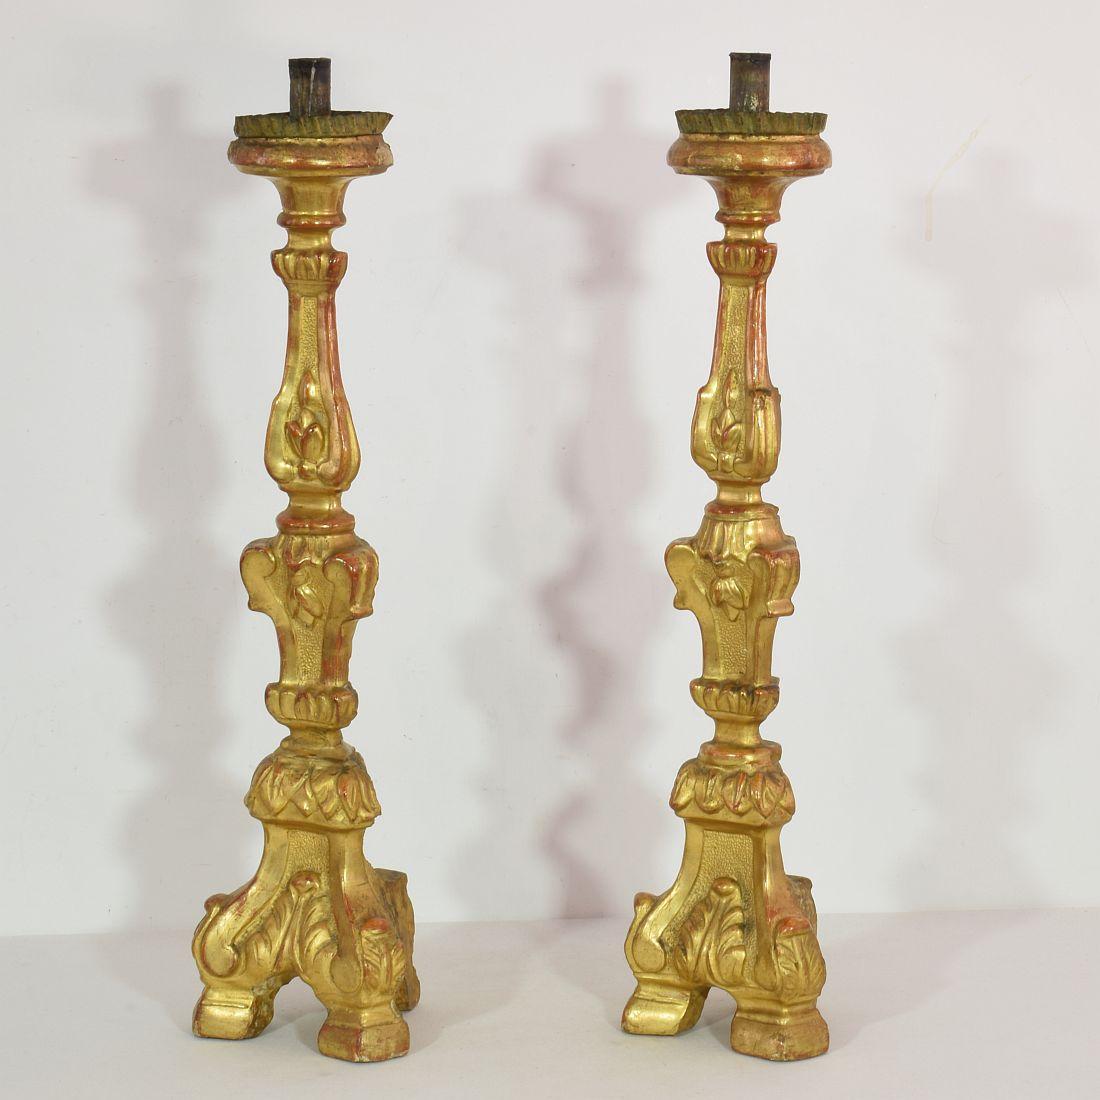 Hand-Carved Couple of Late 18th Century Italian Neoclassical Giltwood Candleholders